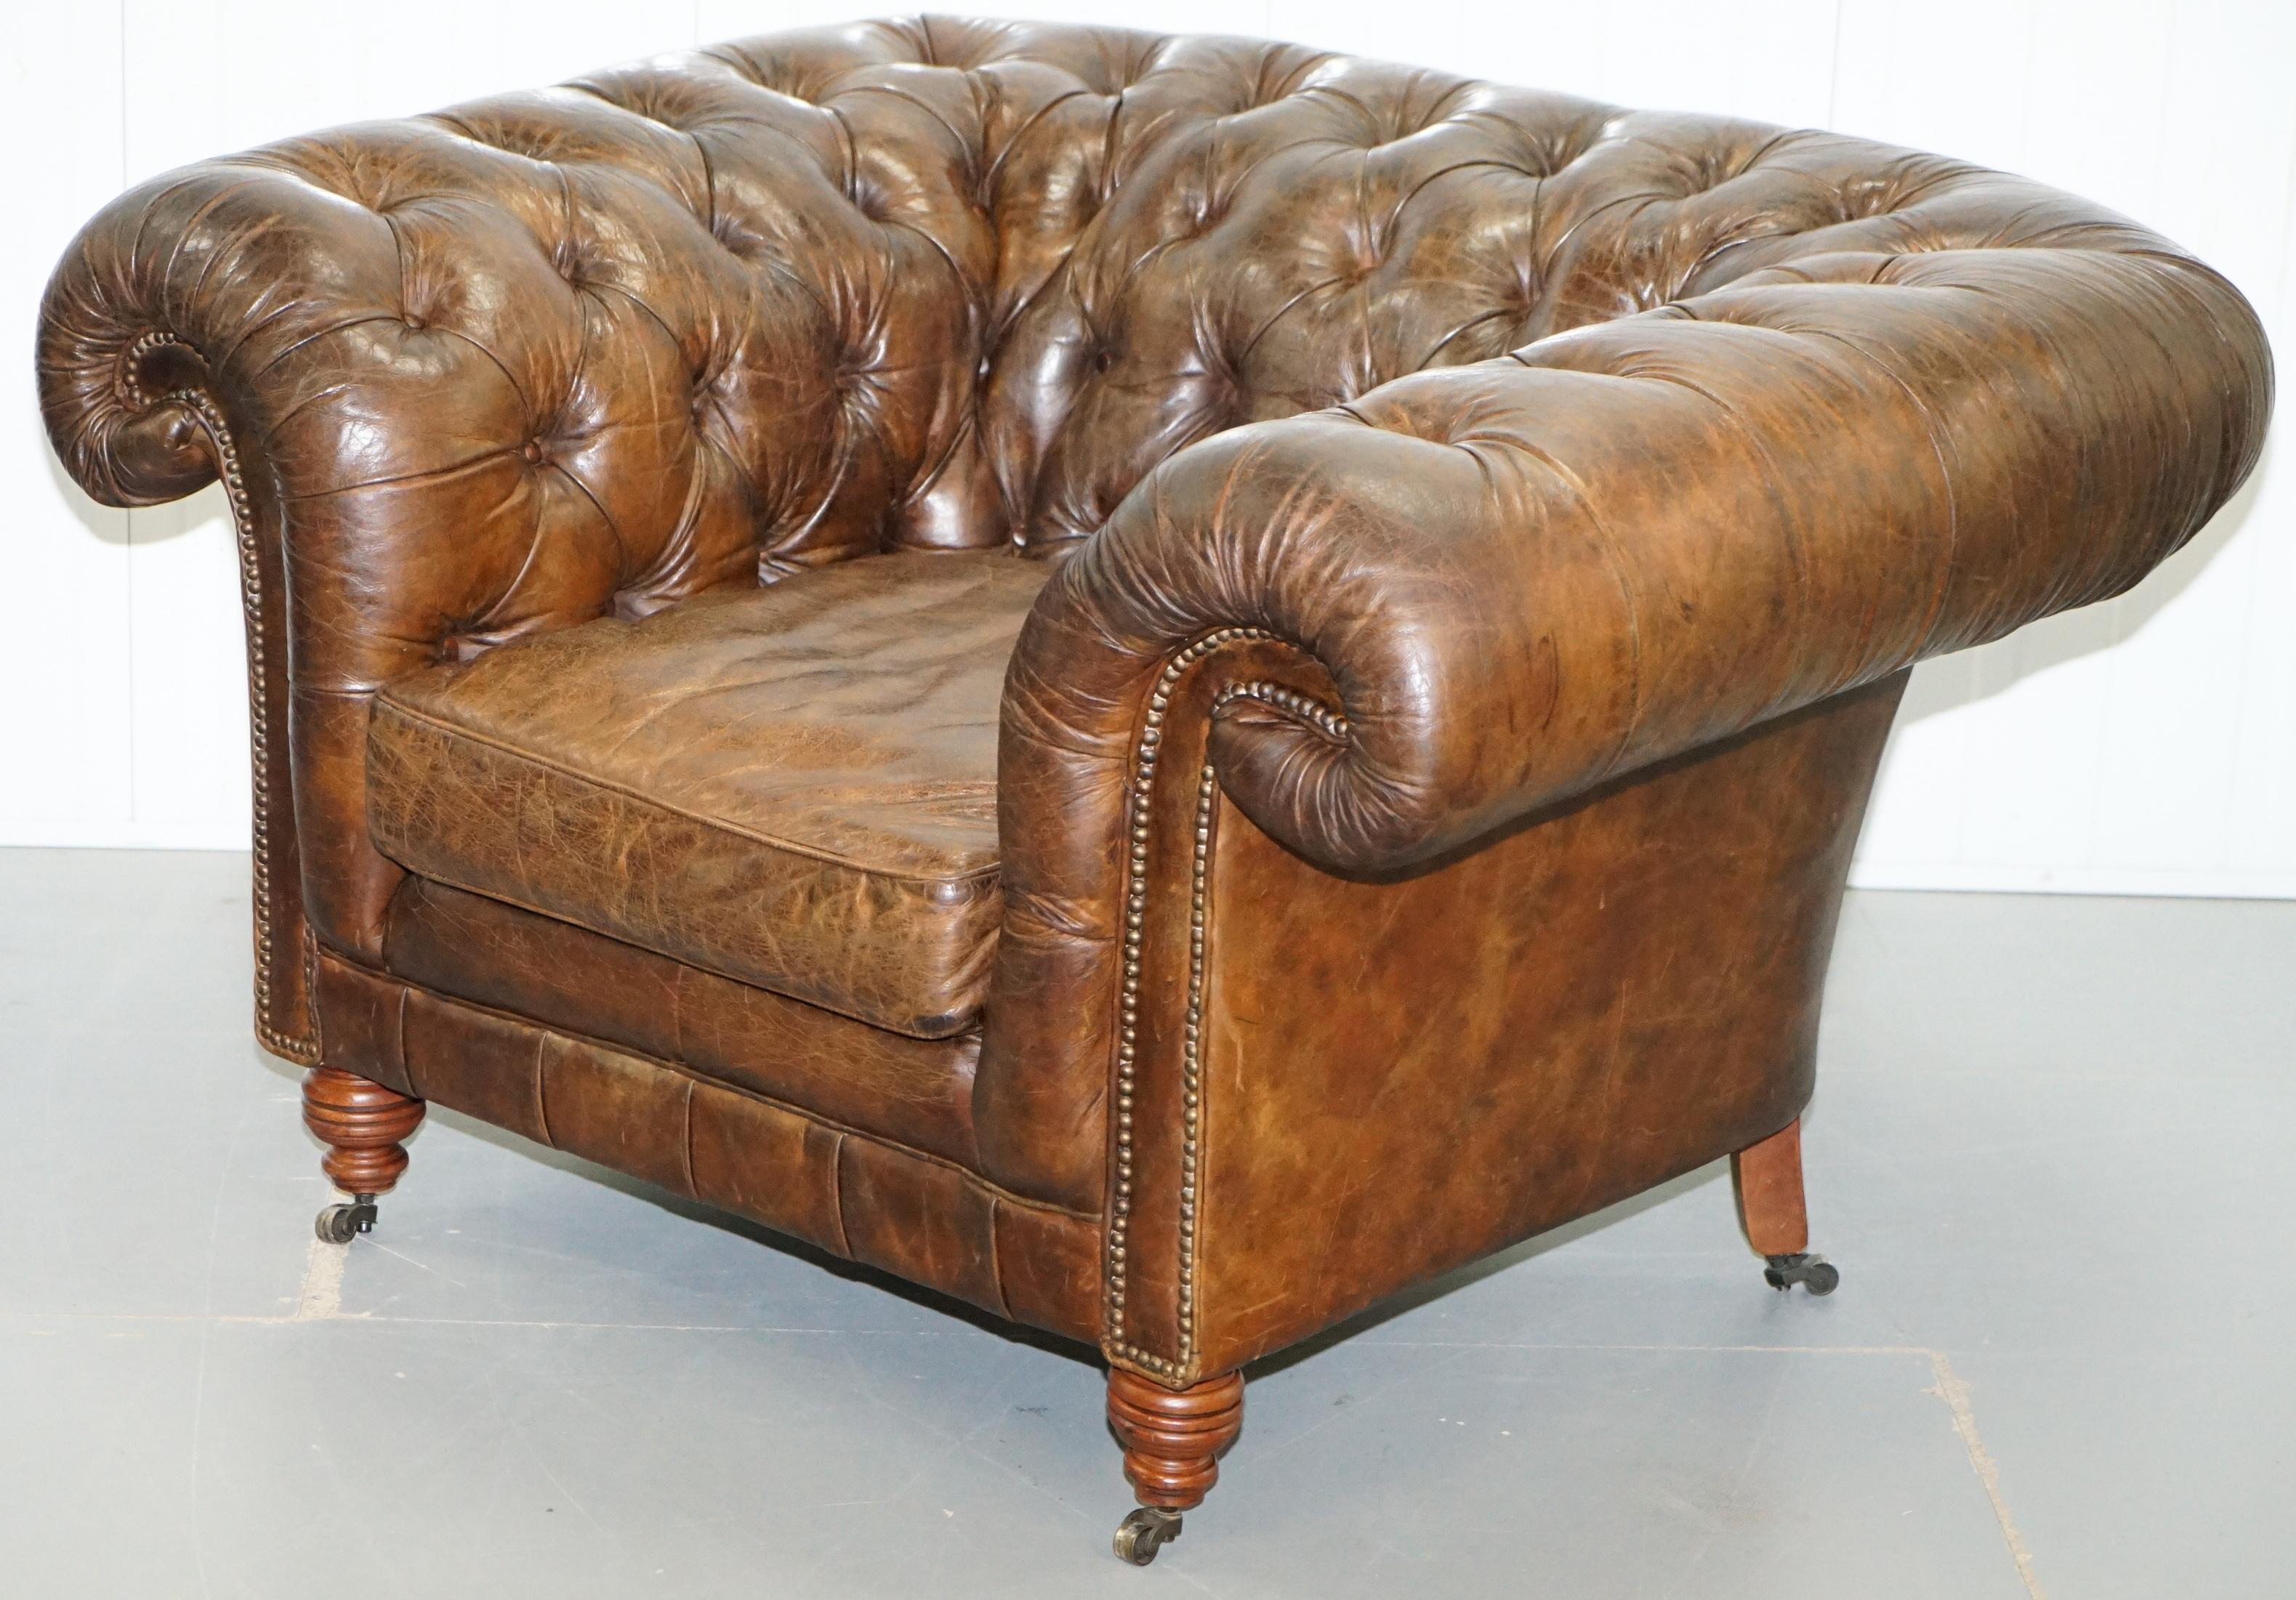 We are delighted to offer for sale this huge Heritage vintage leather Chesterfield club armchair

Please note the delivery fee listed is just a guide, it covers within the M25 only

This is the largest armchair I have ever seen, 142cm wide its